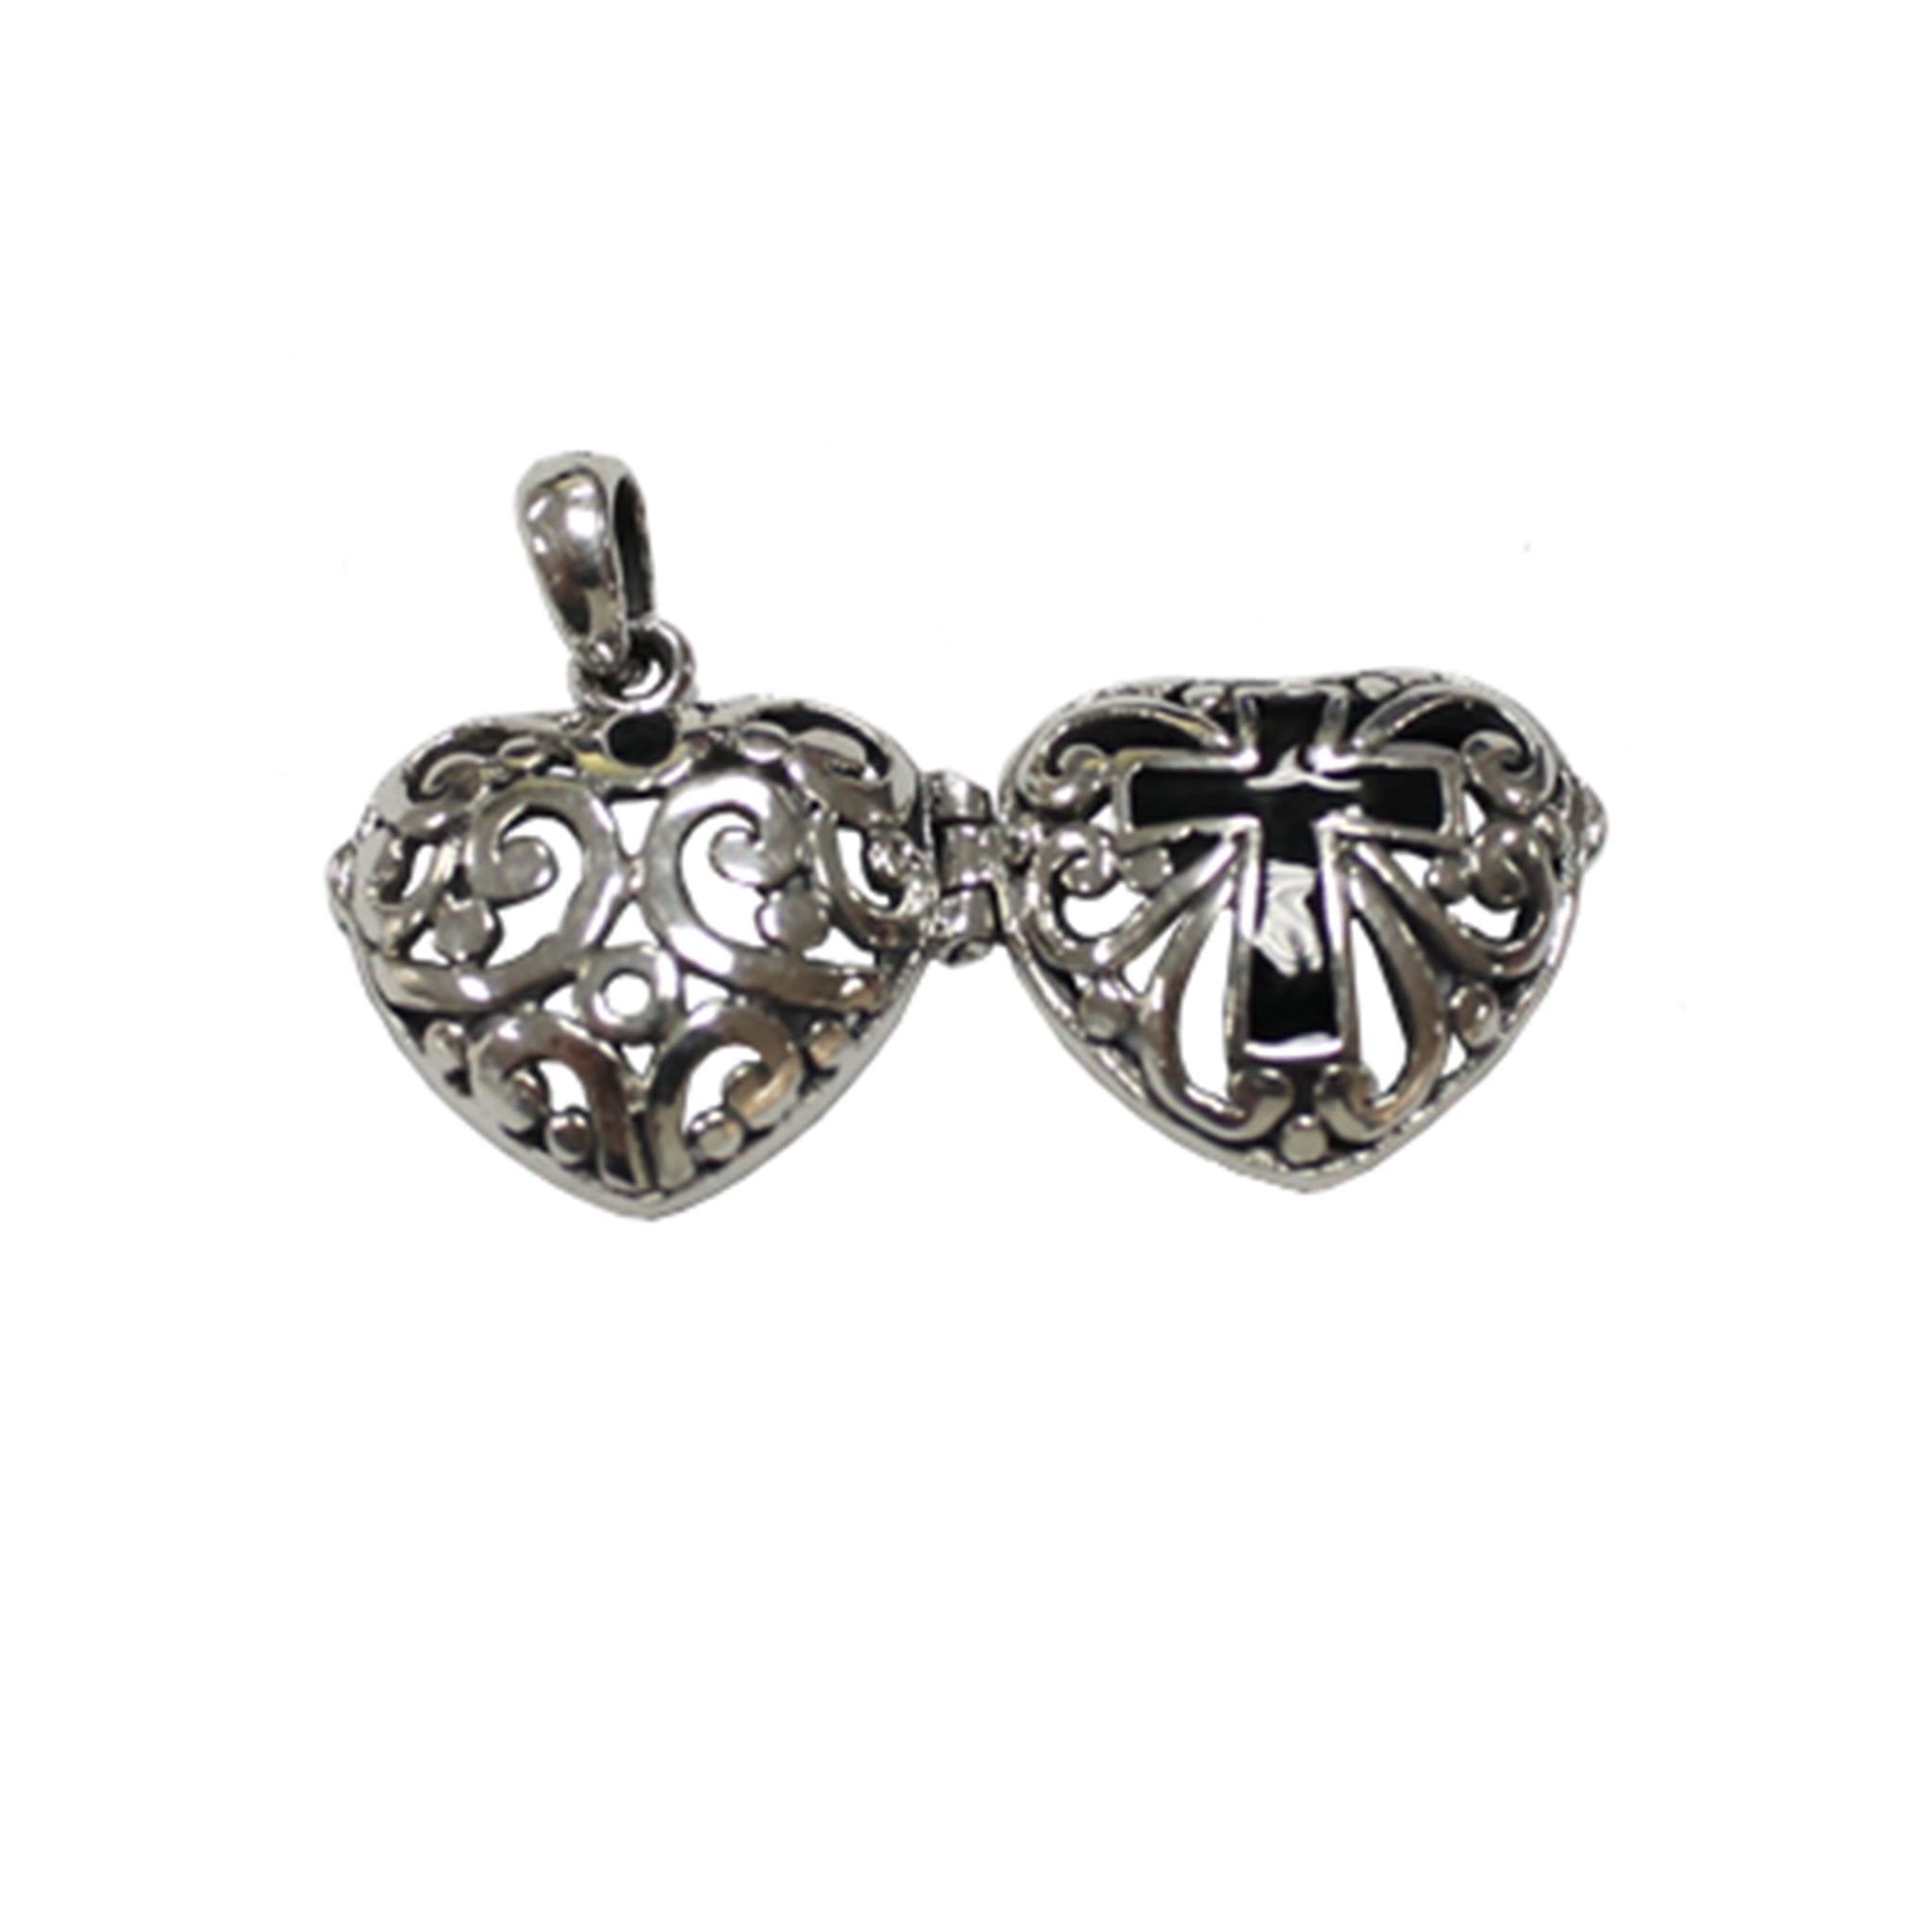 Heart and Cross Locket Charm in Sterling Silver 21.4x18.1x7.9mm